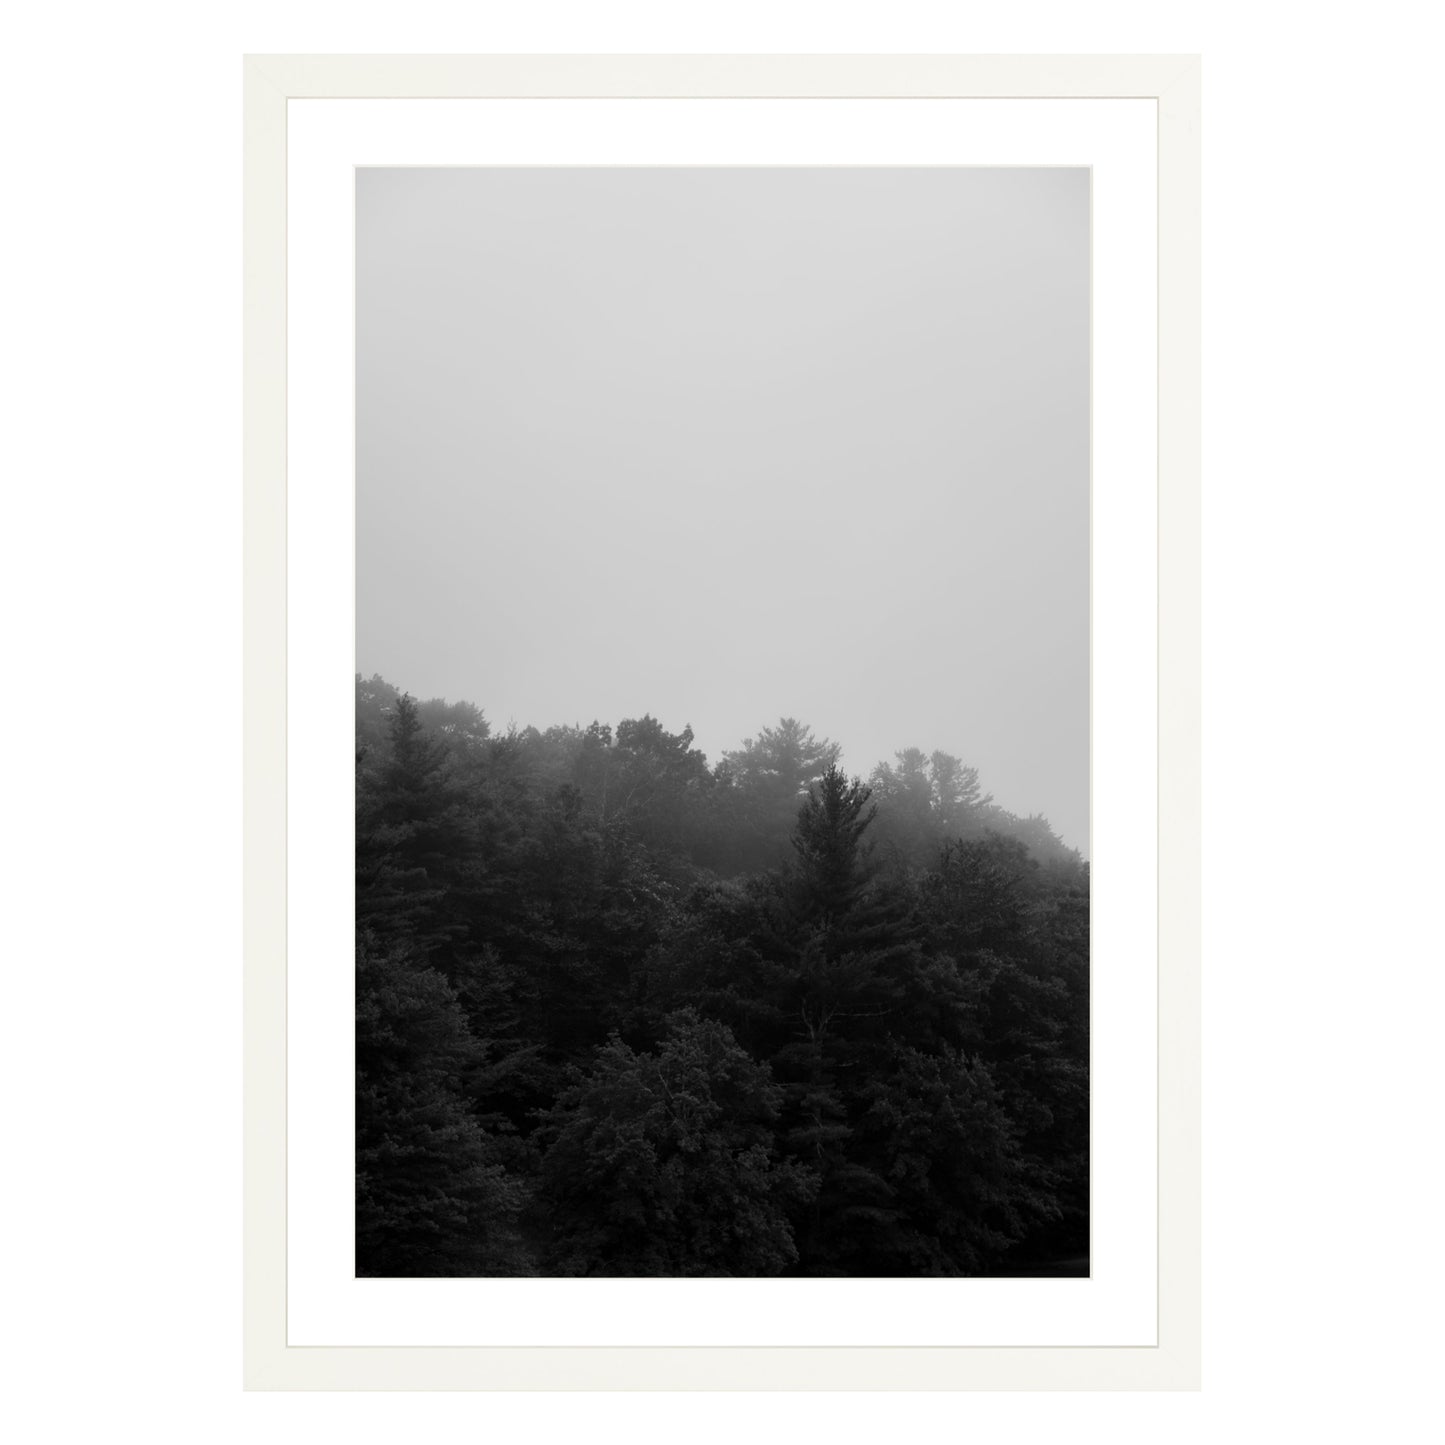 Photograph of trees in fog in white frame with white mat